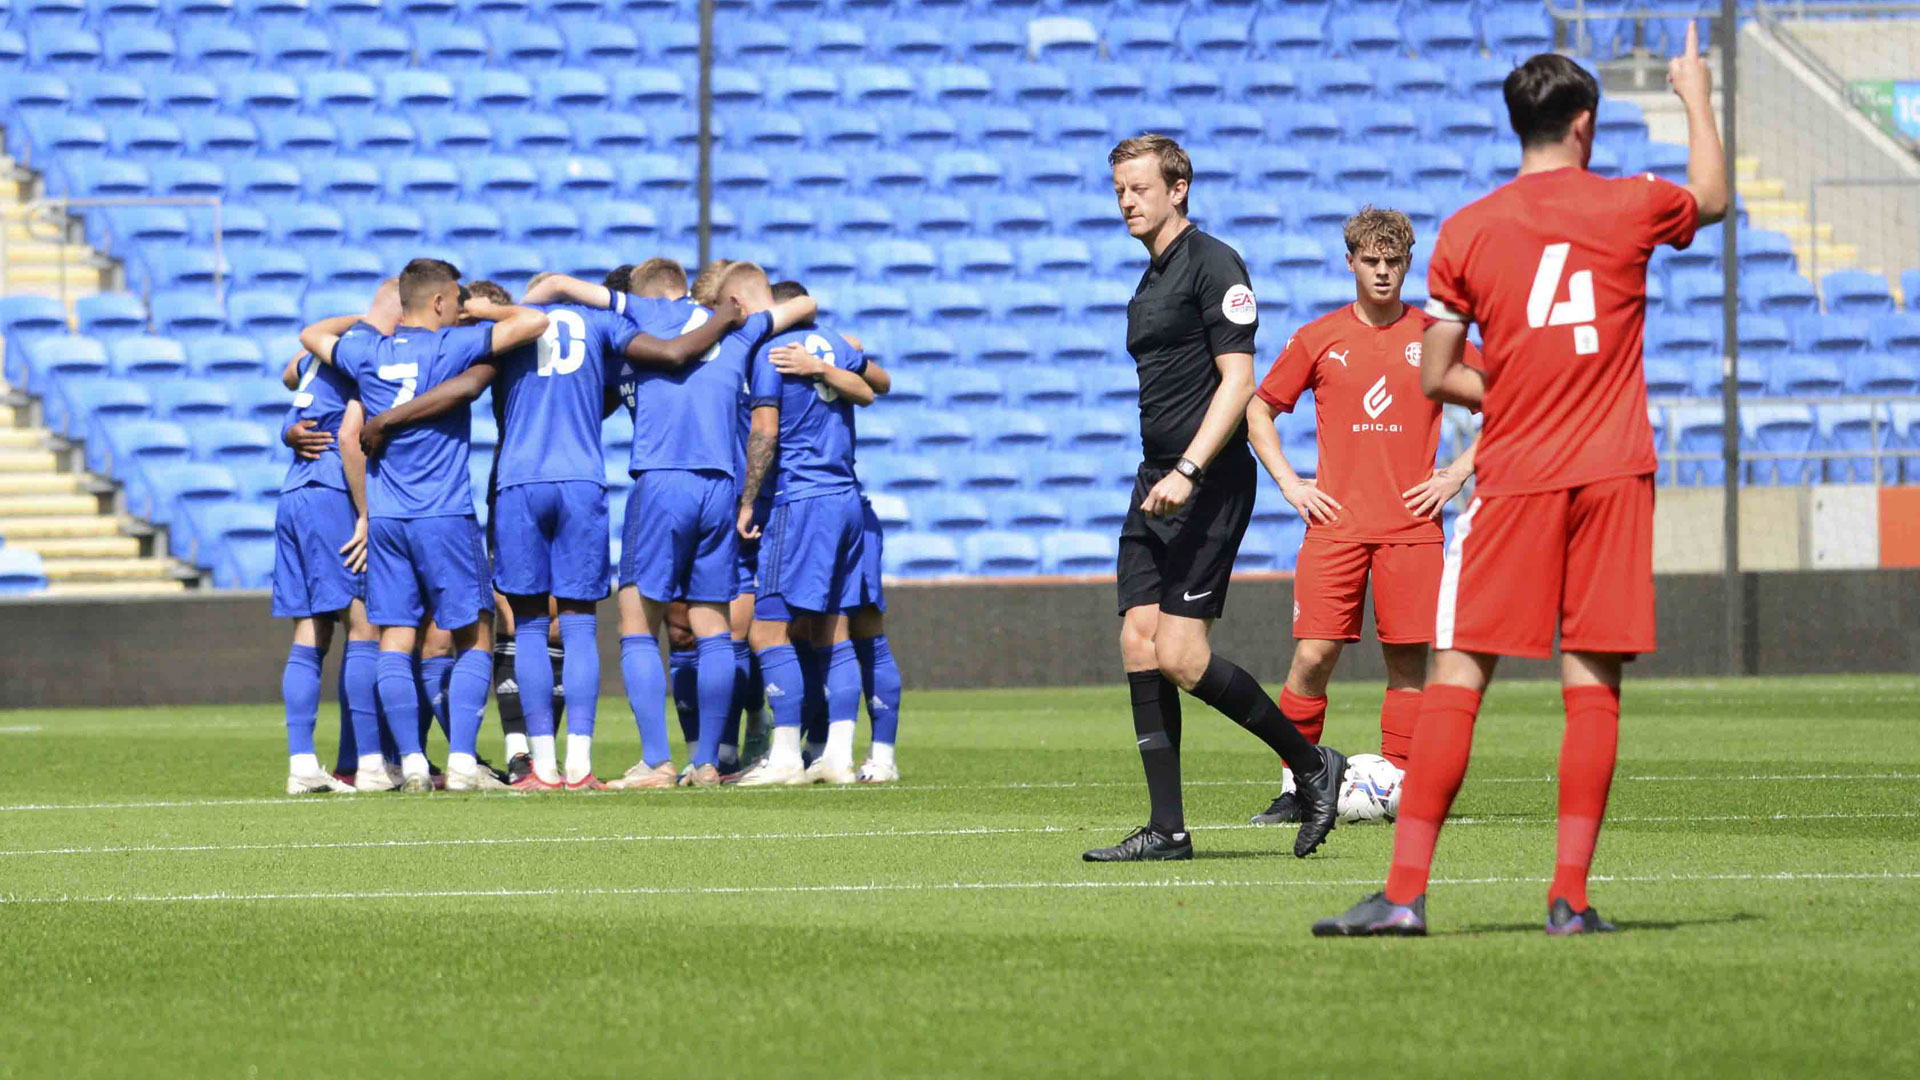 The Bluebirds ready themselves for U23 action at CCS...